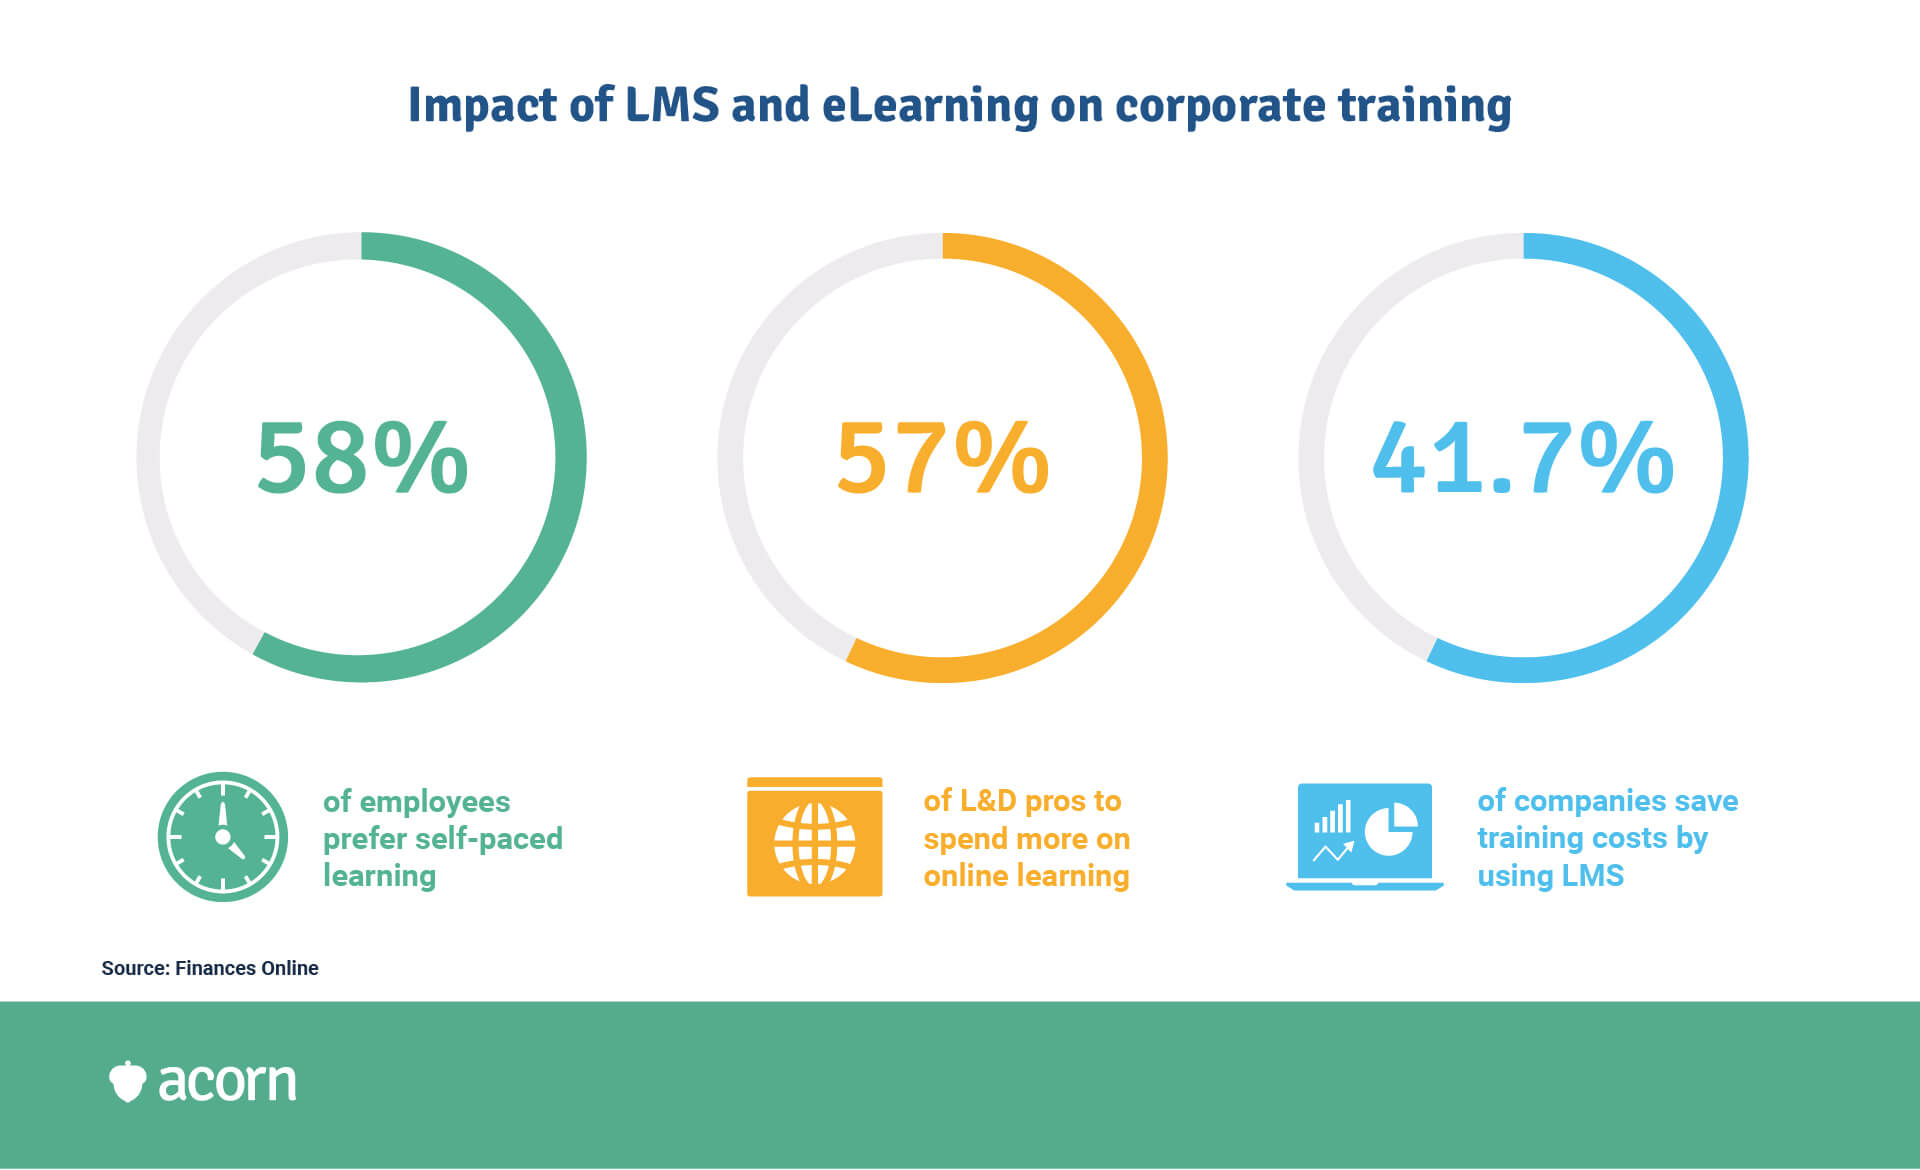 infographic showing statistics about impact of LMSs on corporate training